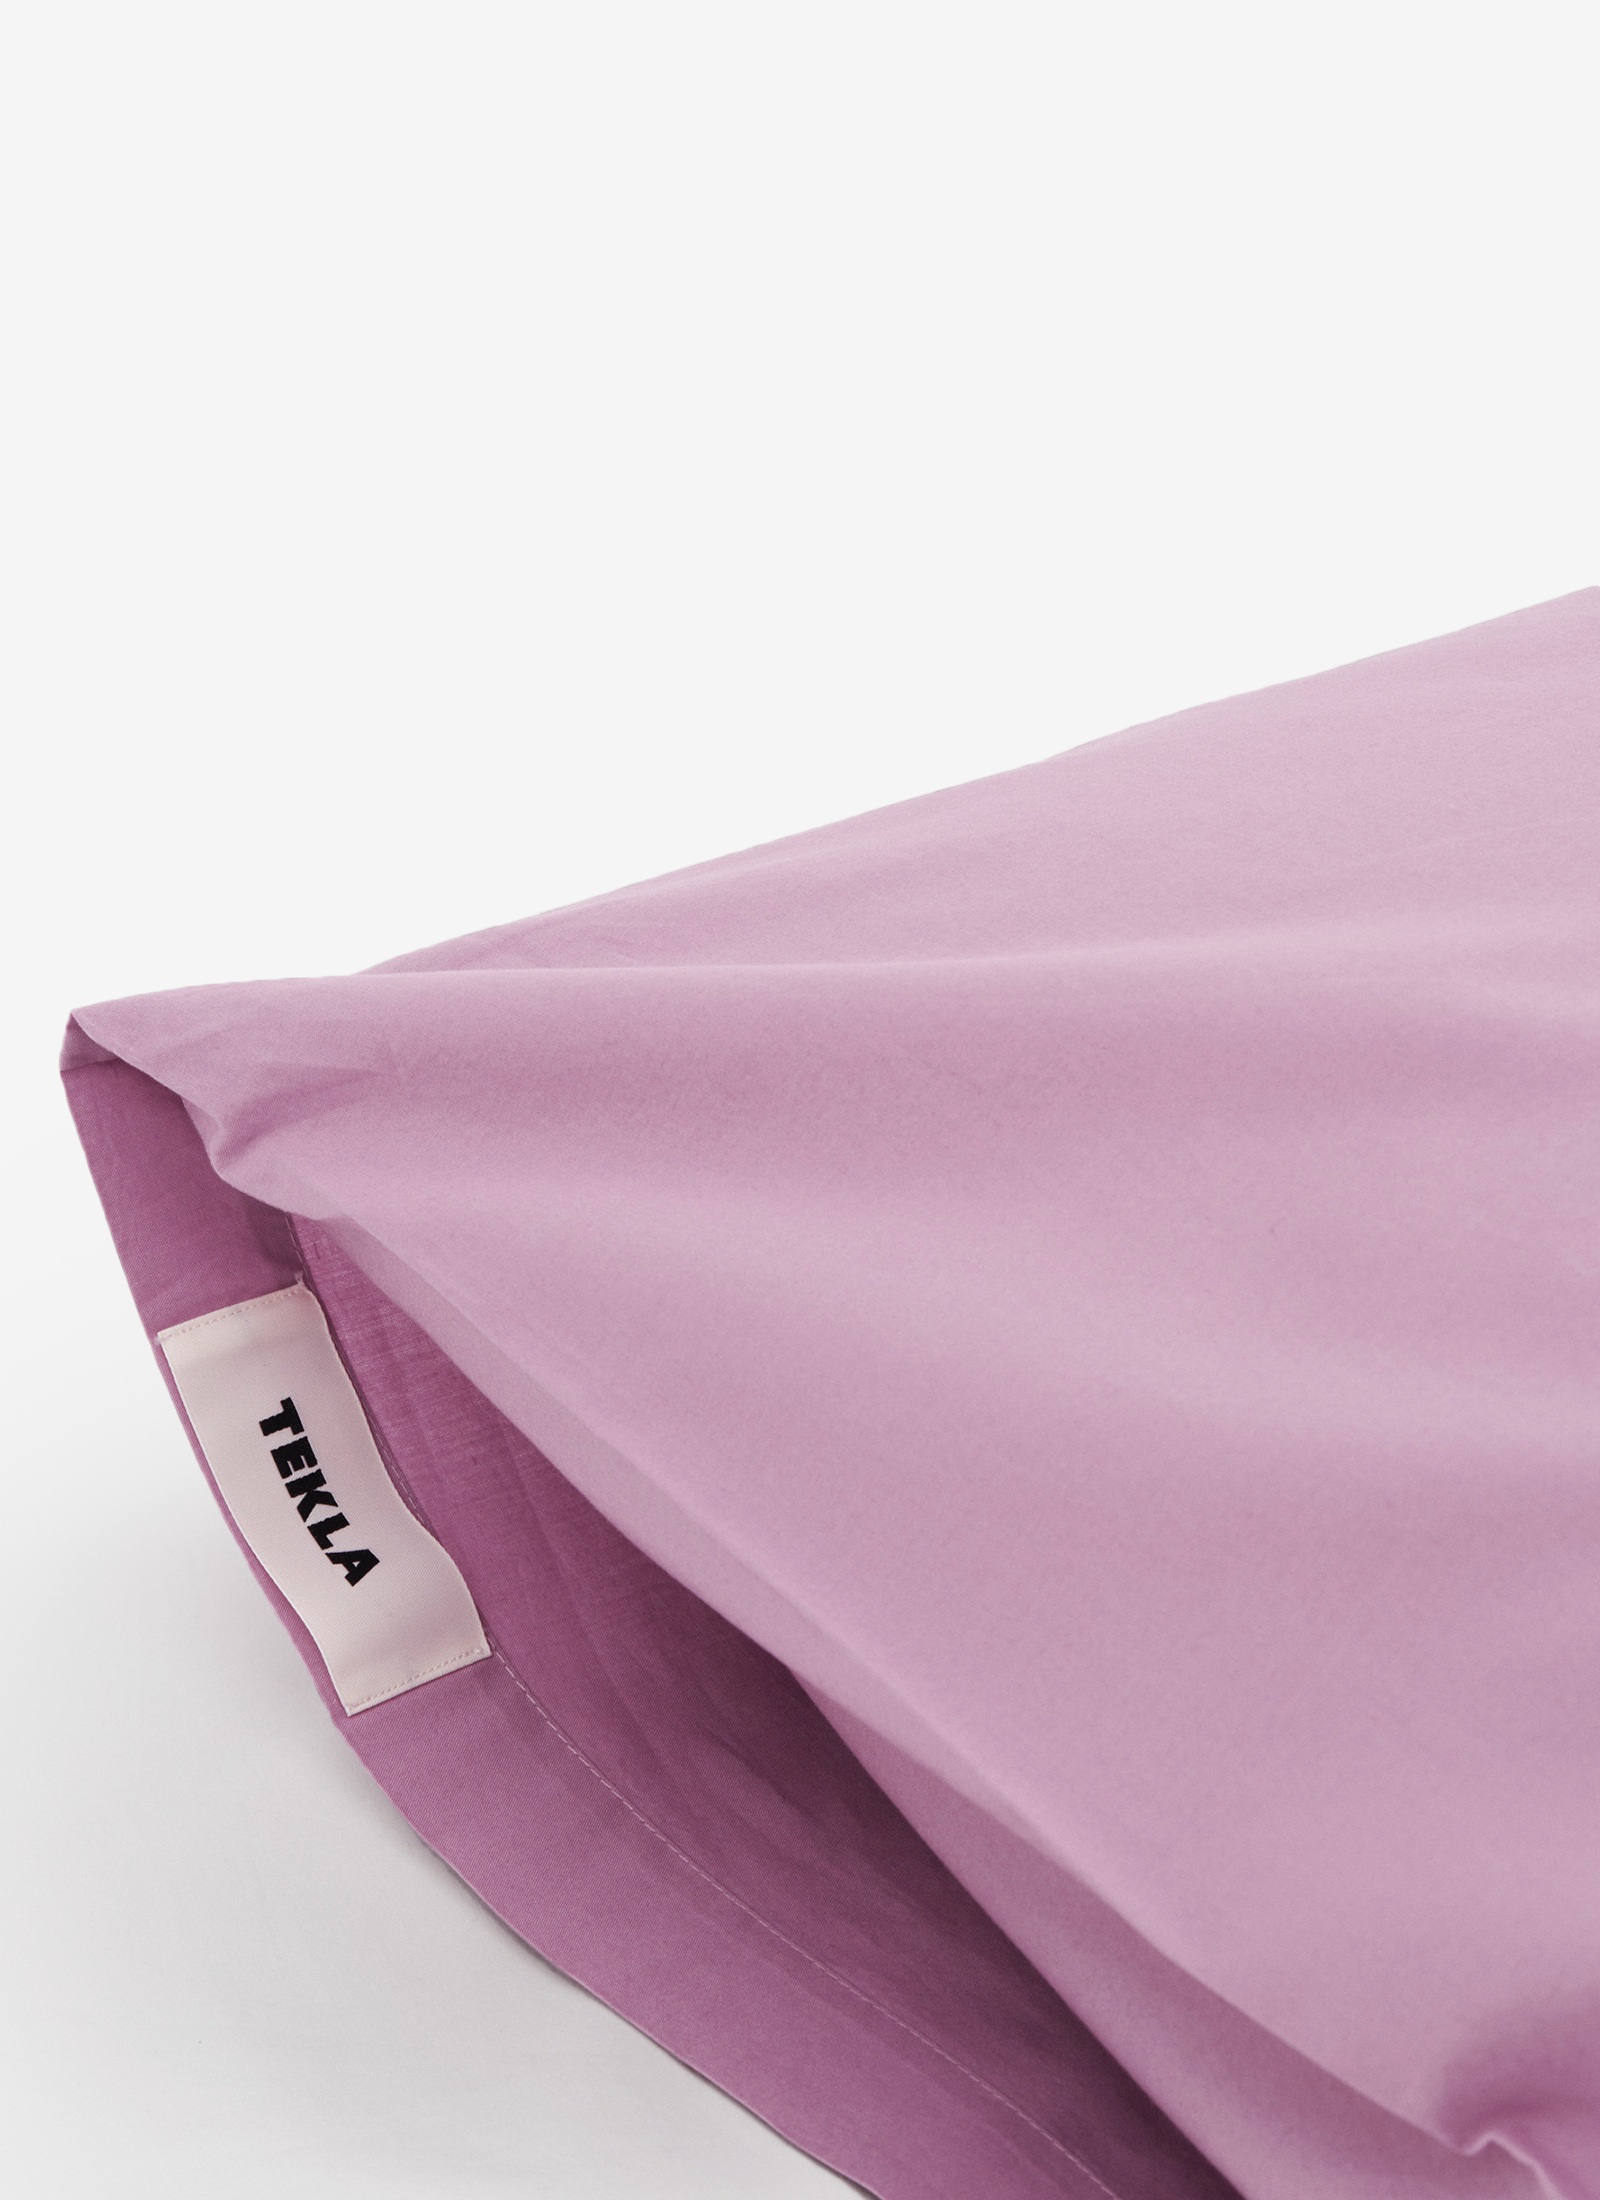 Duvet Cover in Mallow Pink